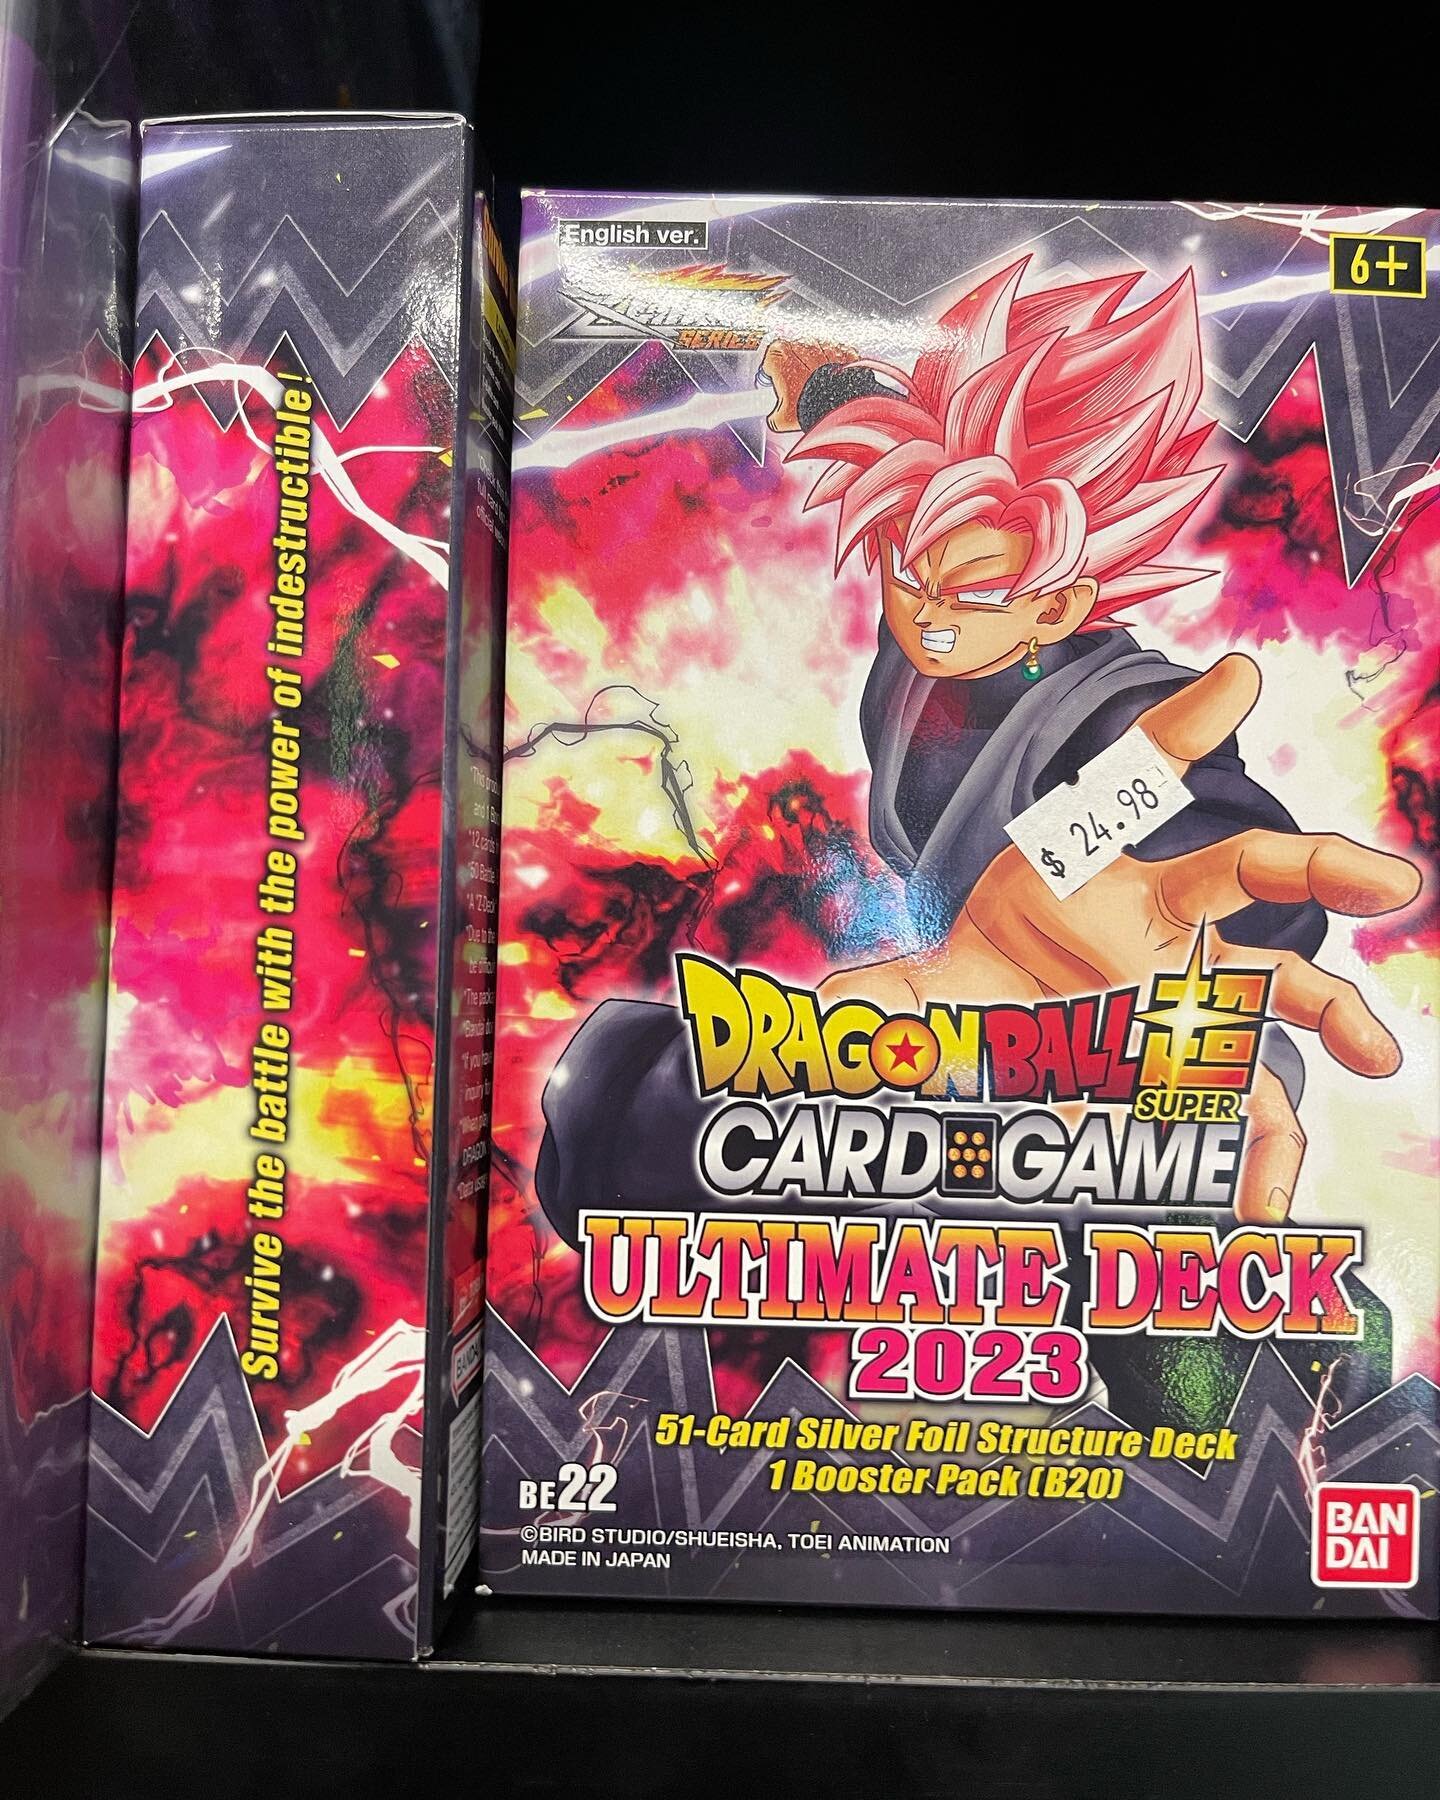 Now in stock #dbs #ultimatedeck2023 #gokublack we@have a small restock on #onepiece set 1. Also restock on #egyptiangoddecks no better time to get into these three #tcg than now with these new decks and booster boxes